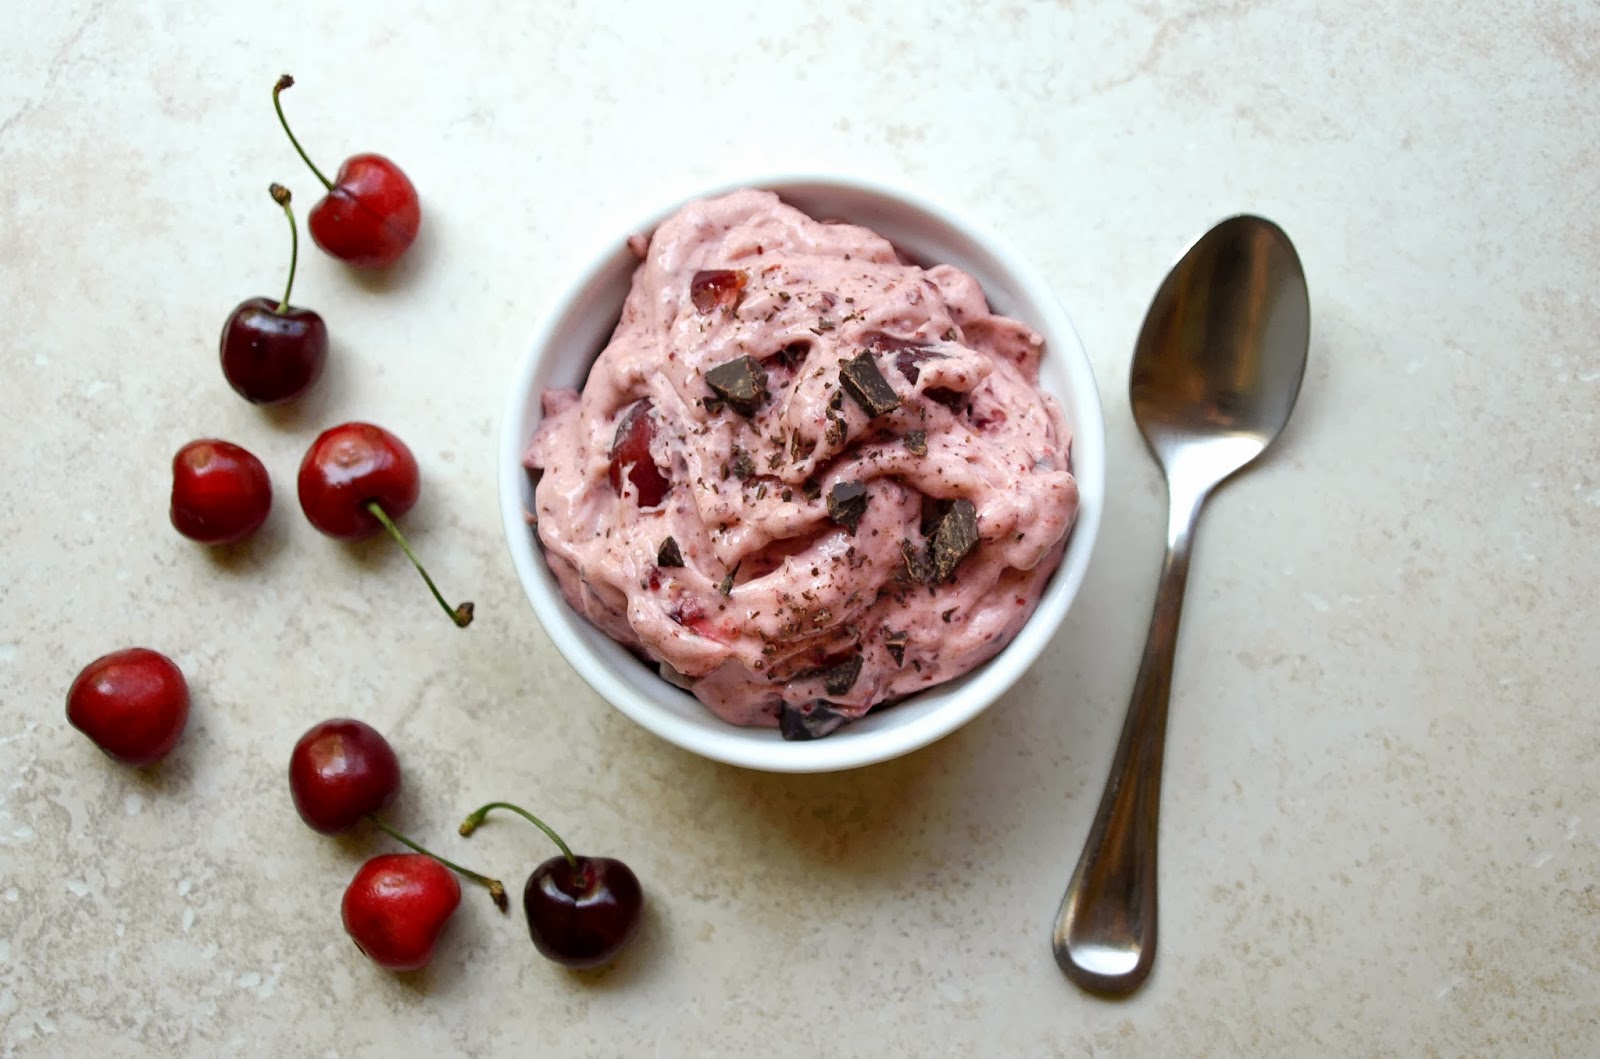 🍨 Create Your Own Ice Cream Flavor and We’ll Reveal What People Find Most Attractive About You cherries in ice cream